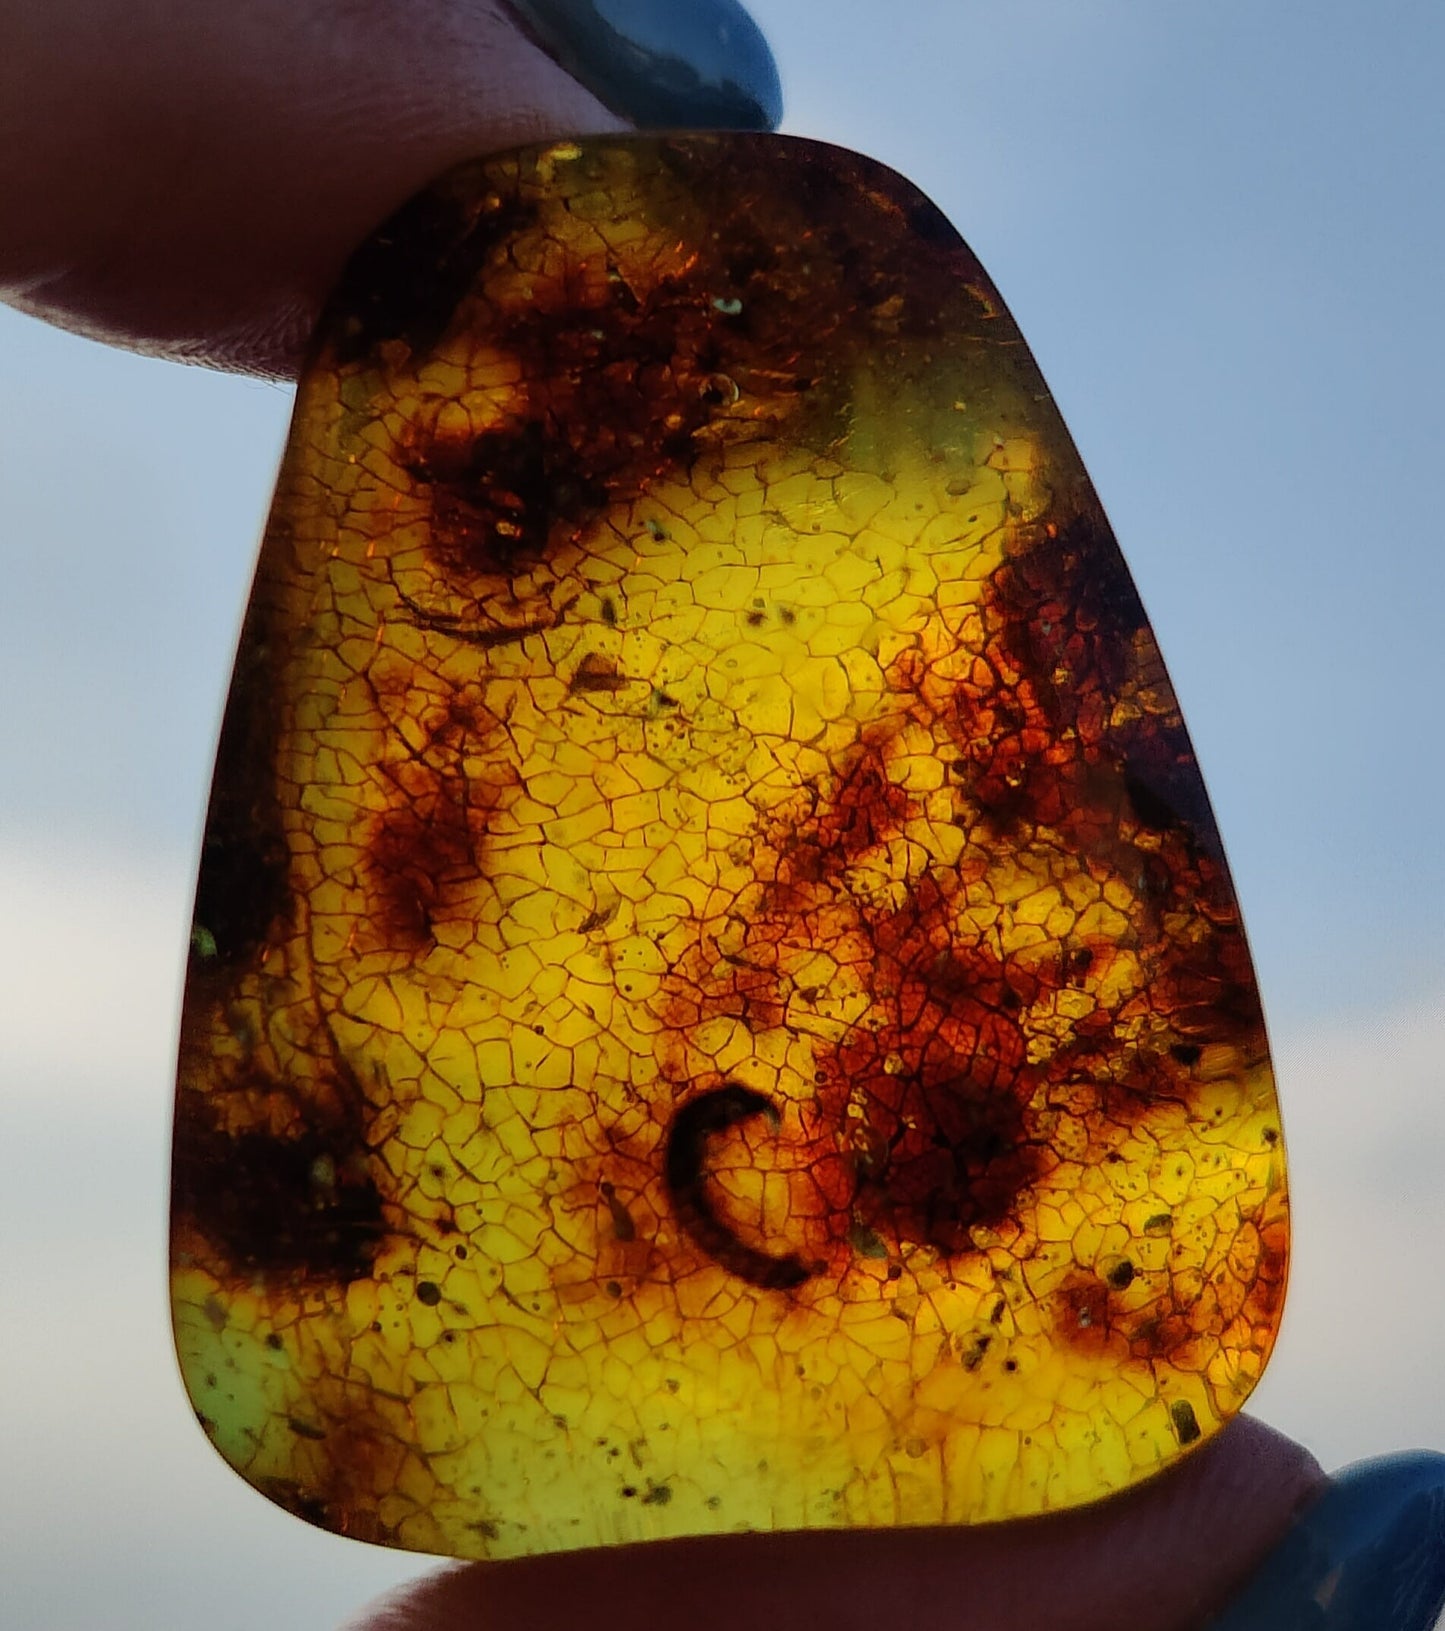 Amber Piece with Natural Insect Inclusion -Worm